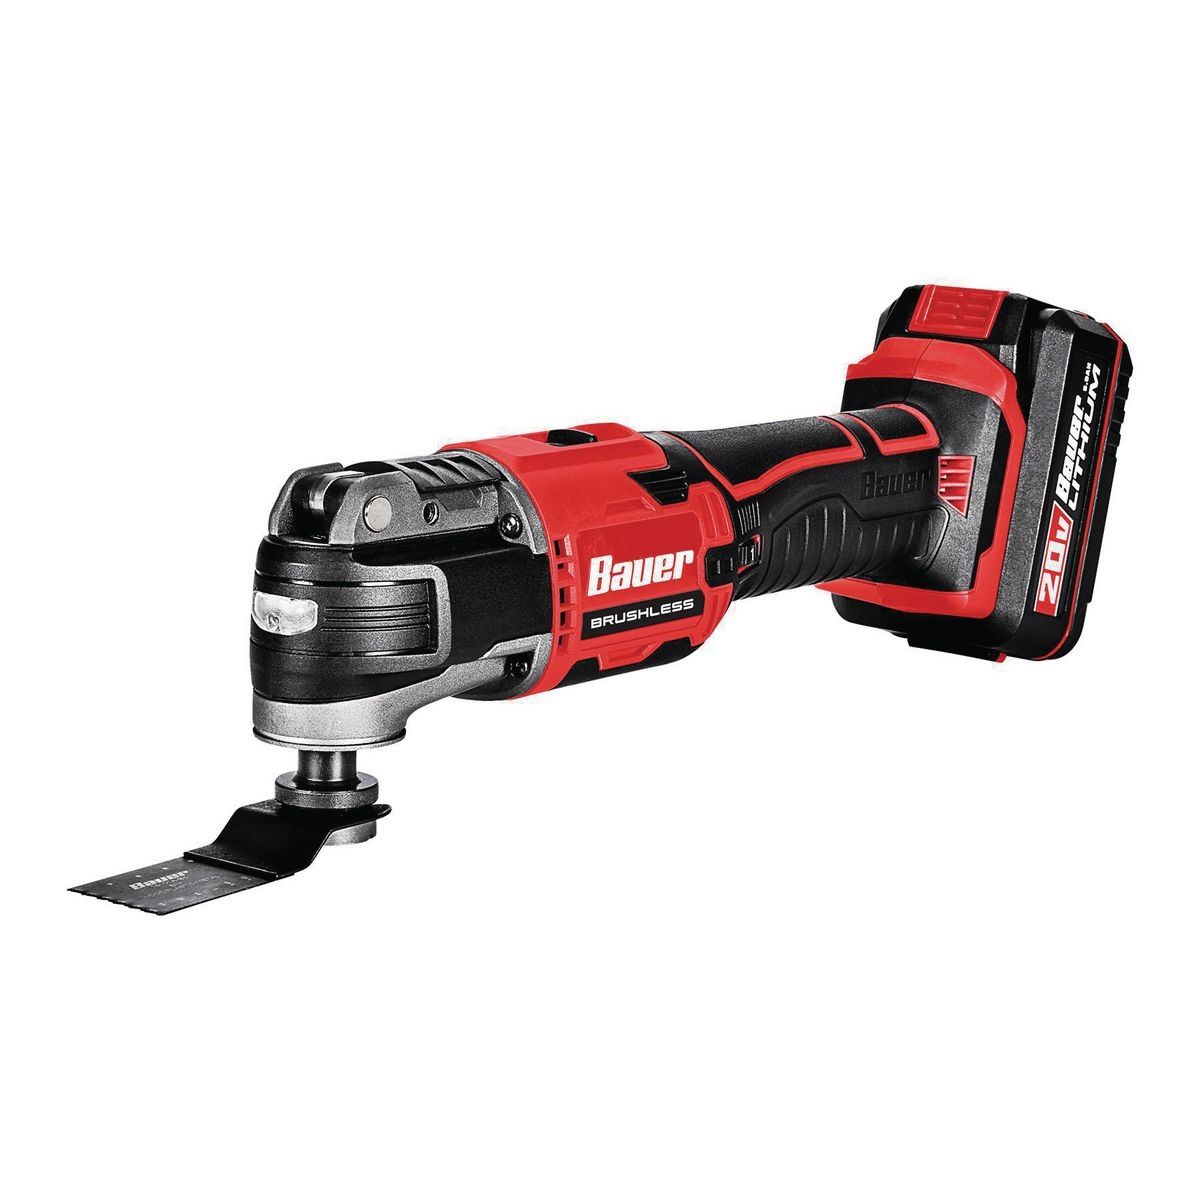 BAUER 20V Brushless Cordless Variable Speed Oscillating Multi-Tool - Tool Only